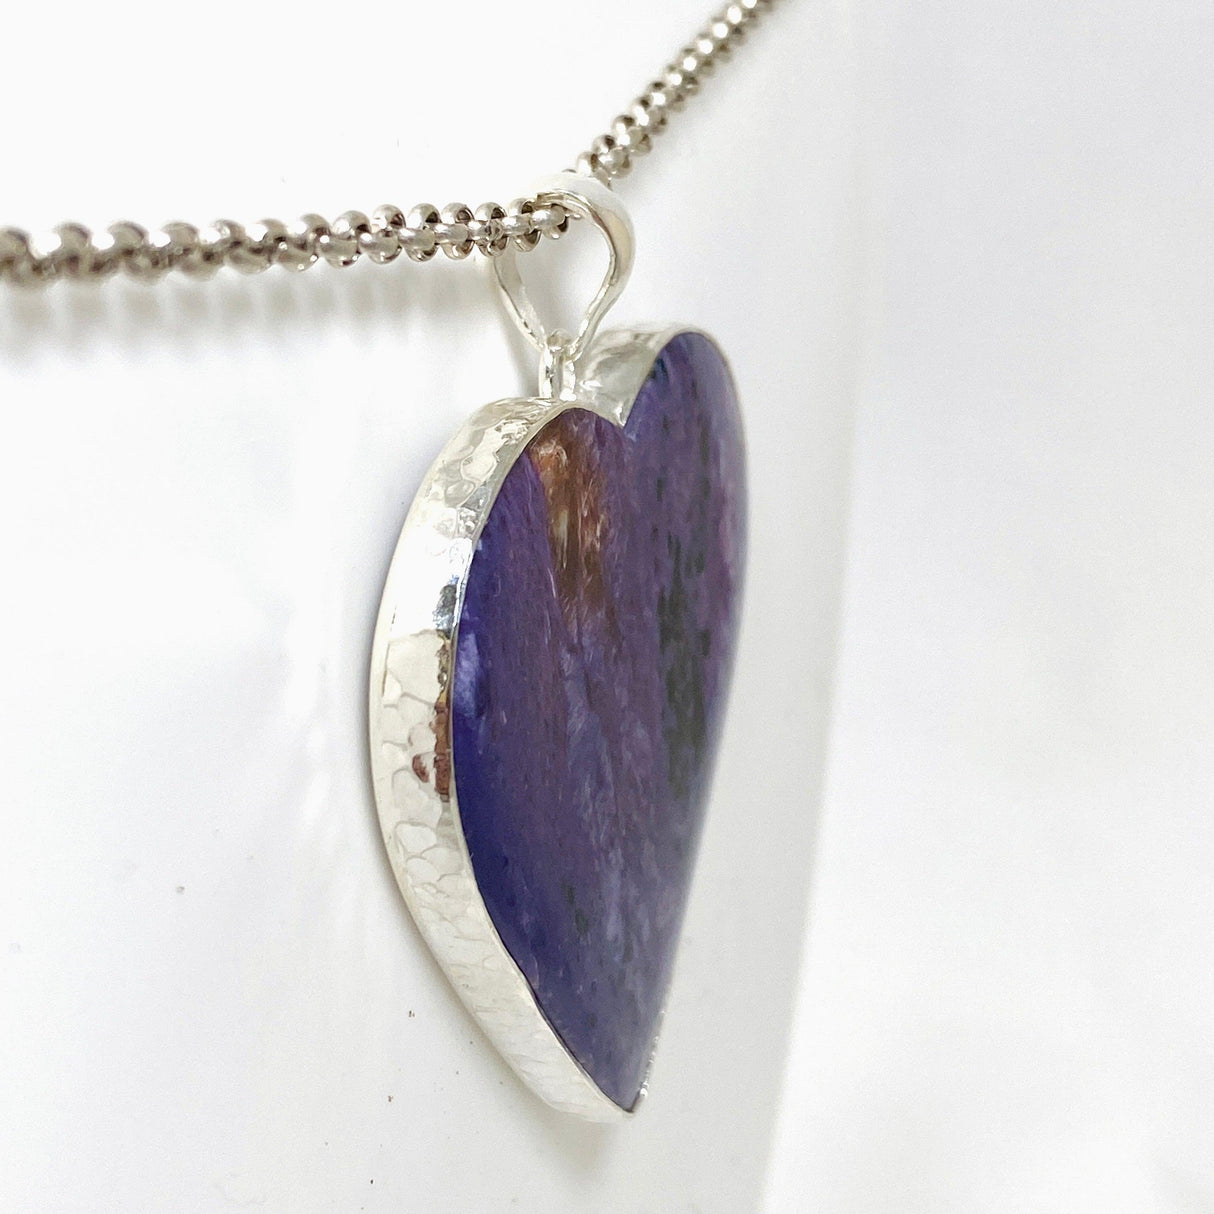 Charoite Heart Pendant in a Hammered Setting KPGJ4474 - Nature's Magick